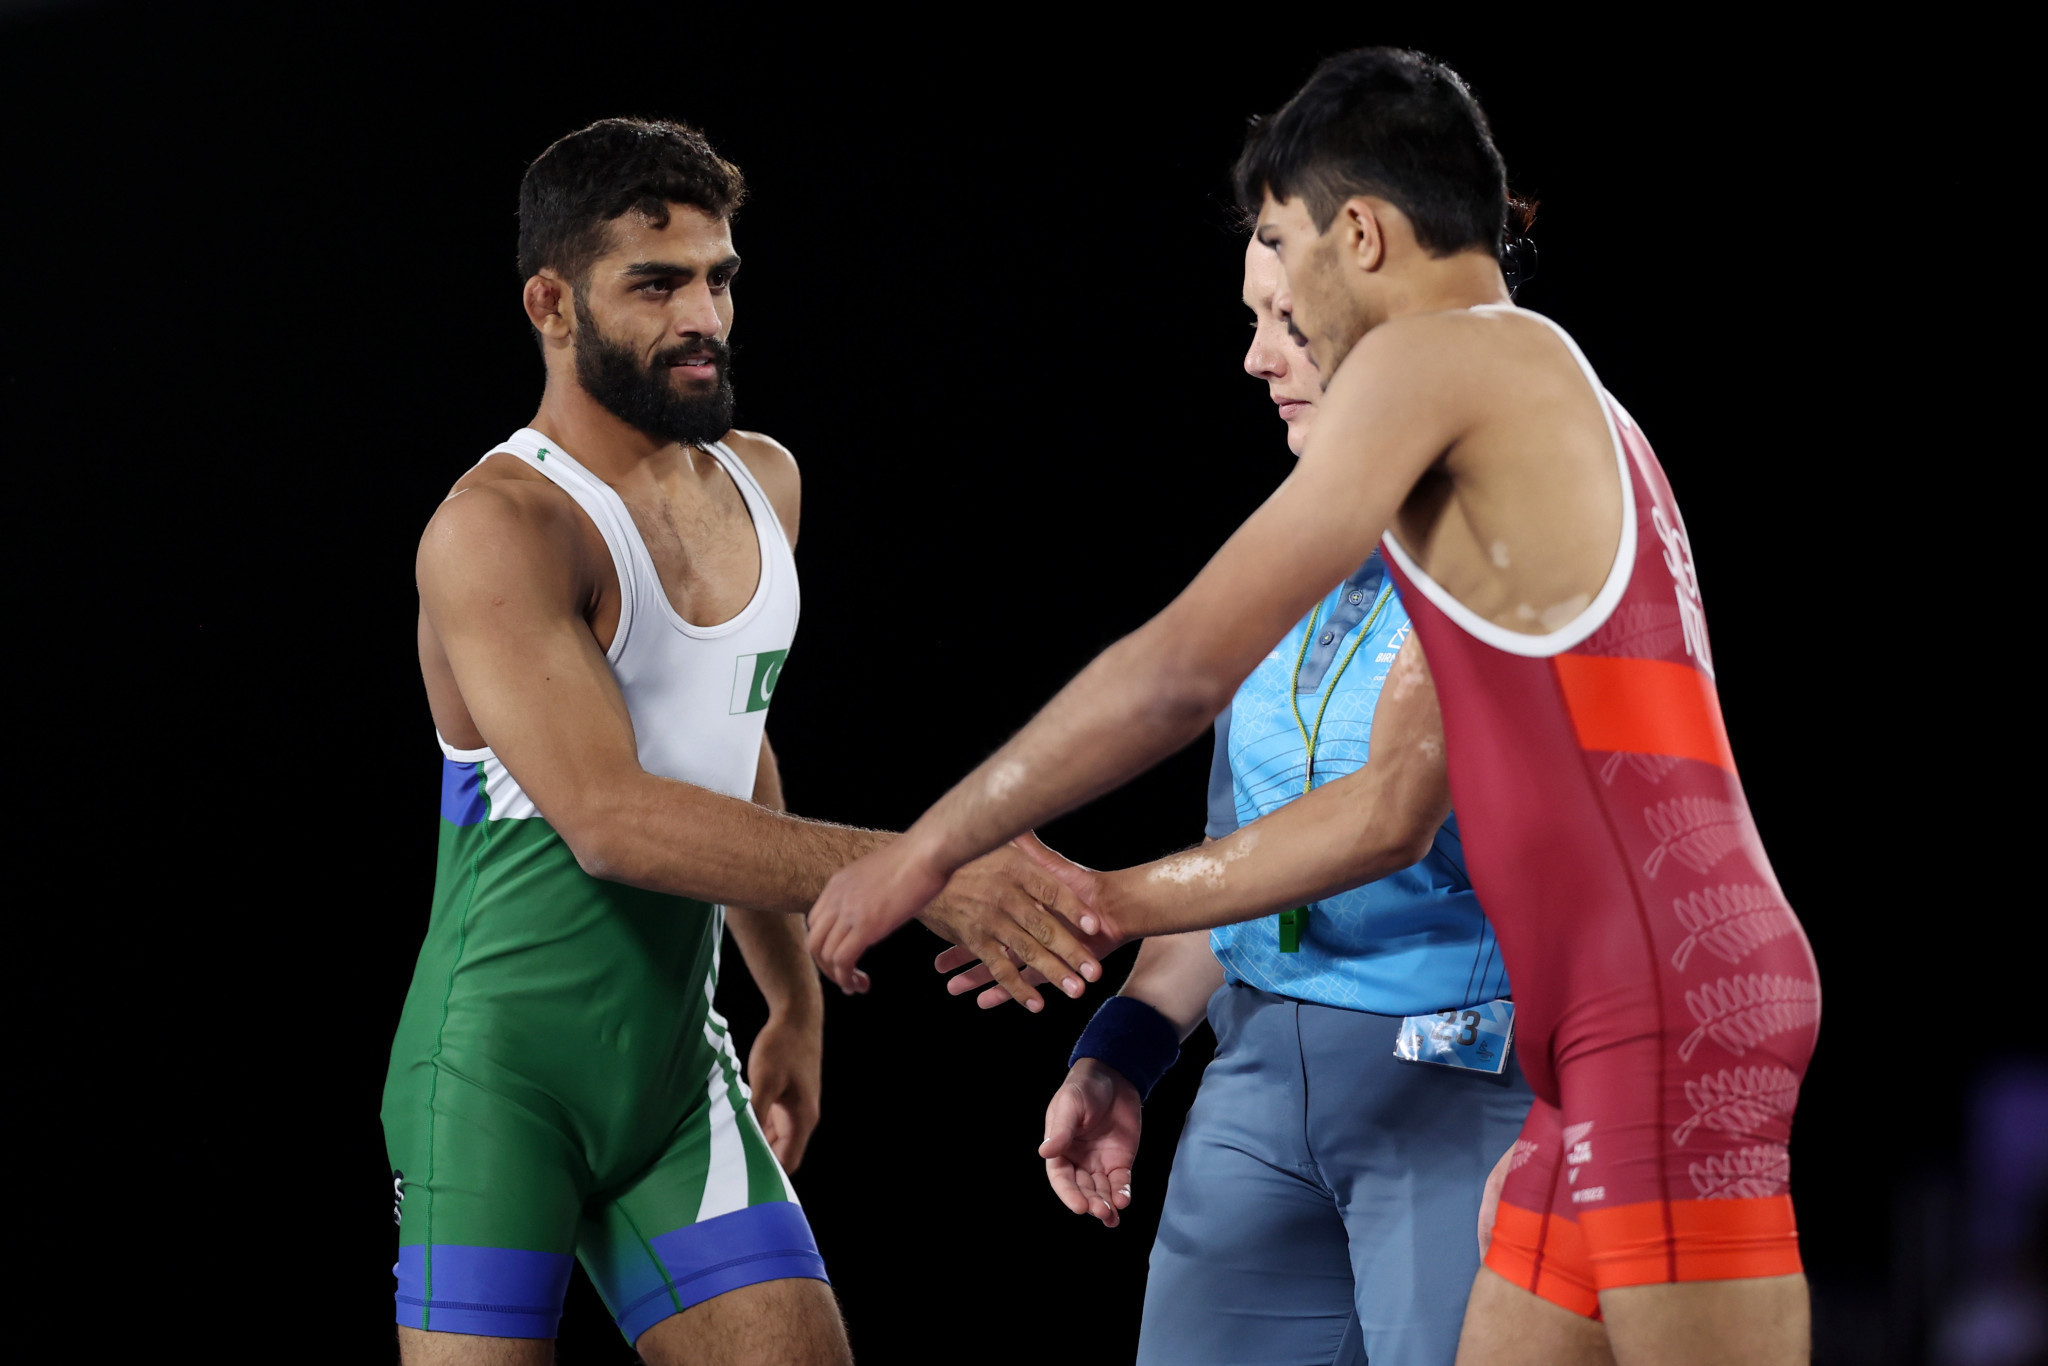 Ali Asad, left, defeat Suraj Singh, right, in the men's under-57kg wrestling repechage round at Birmingham 2022 but has since been disqualified ©Getty Images